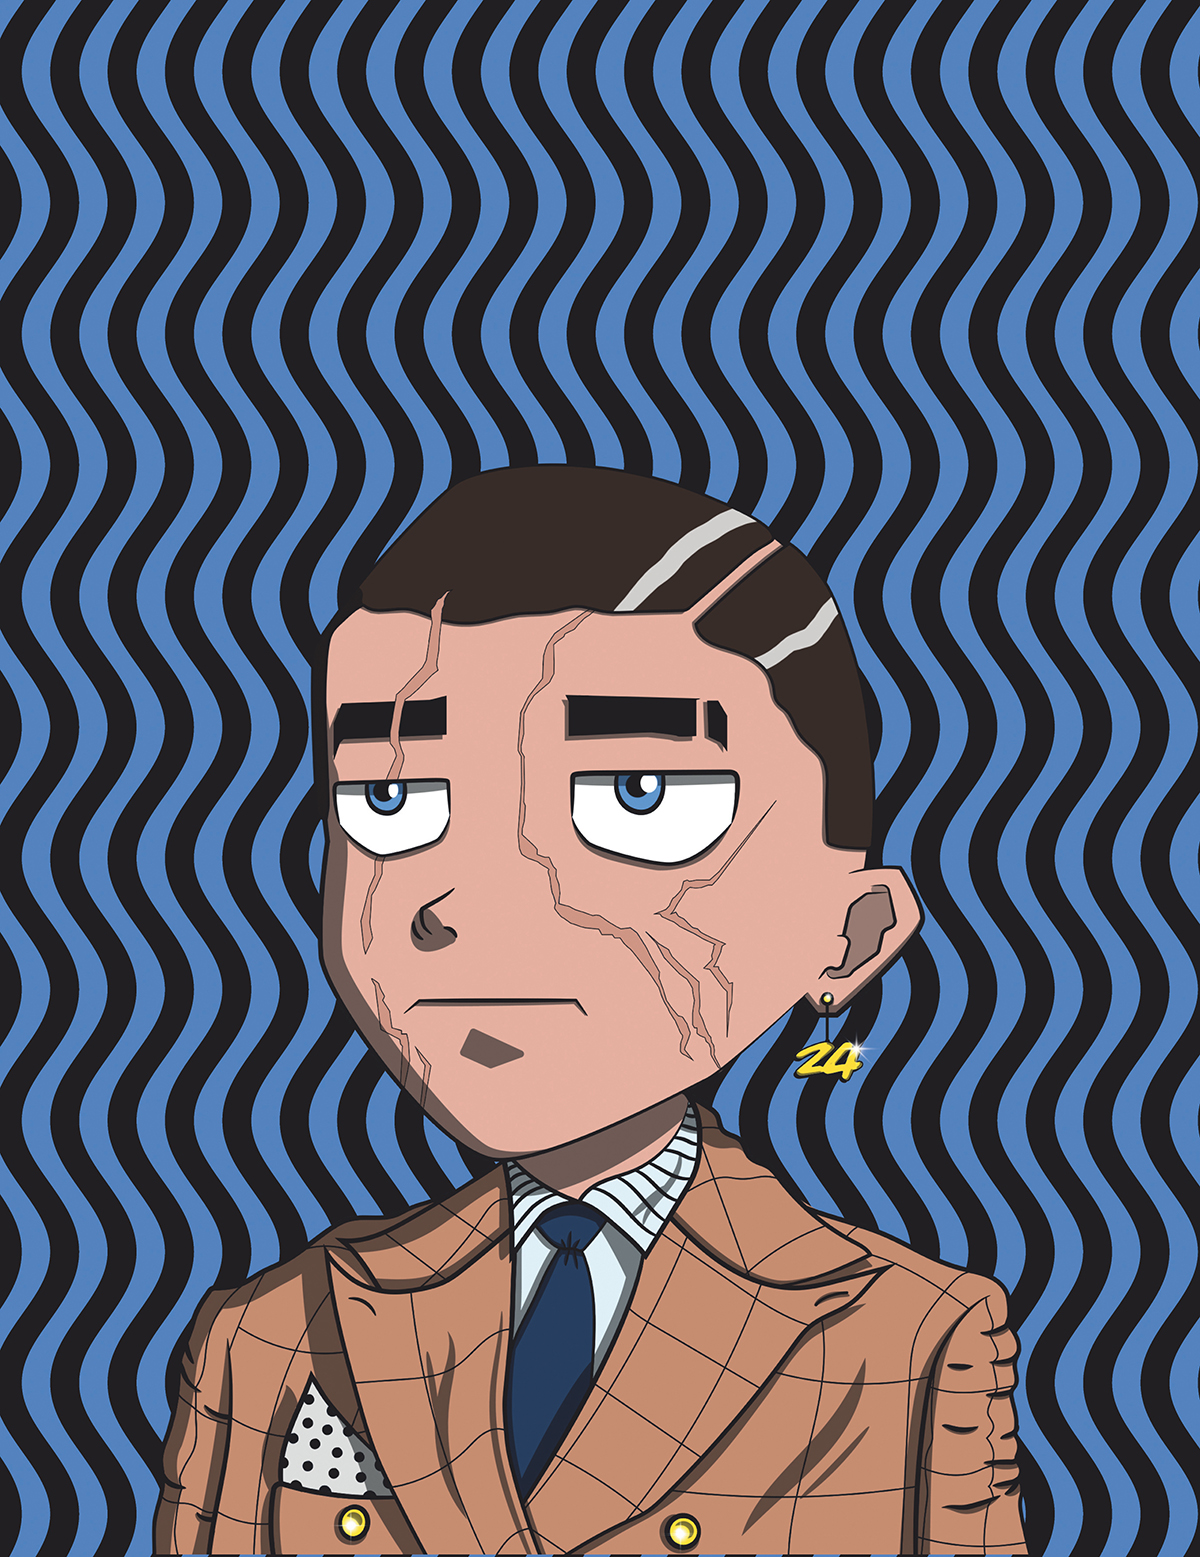 Blue and black swirl background with a cartoon of a man in a brown jacket and wearing an earing